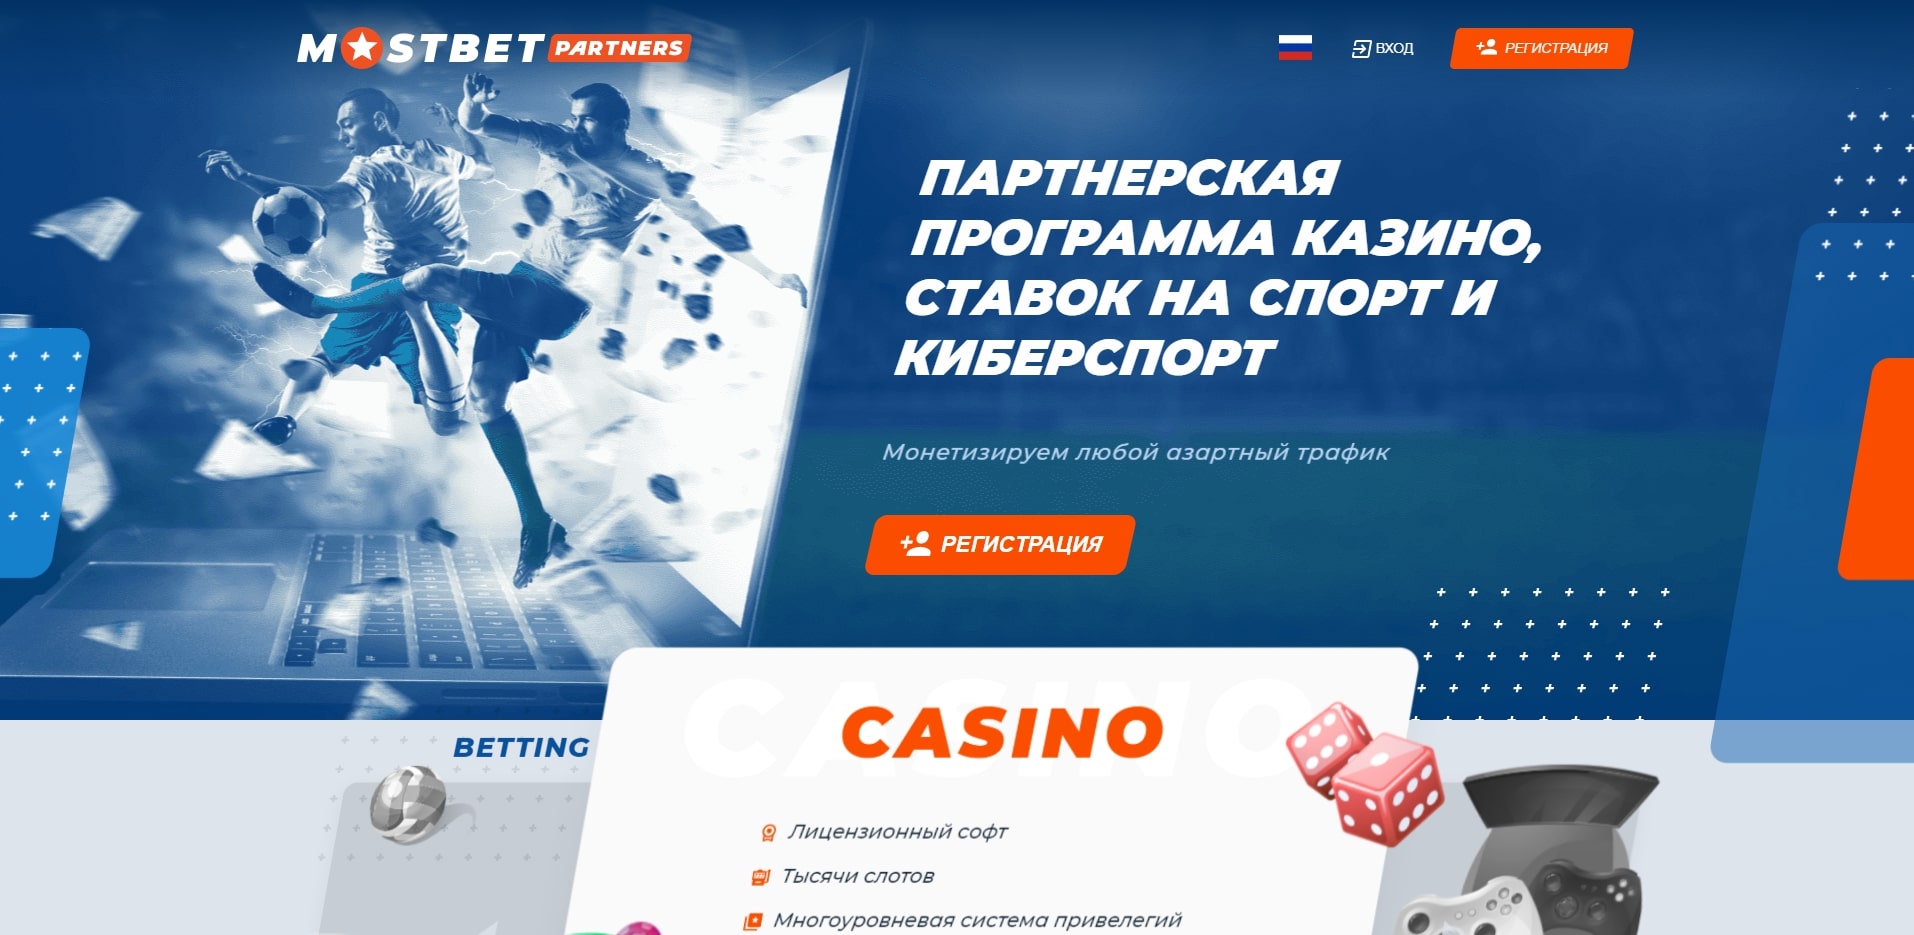 How 5 Stories Will Change The Way You Approach Mostbet Betting and Casino in Turkey